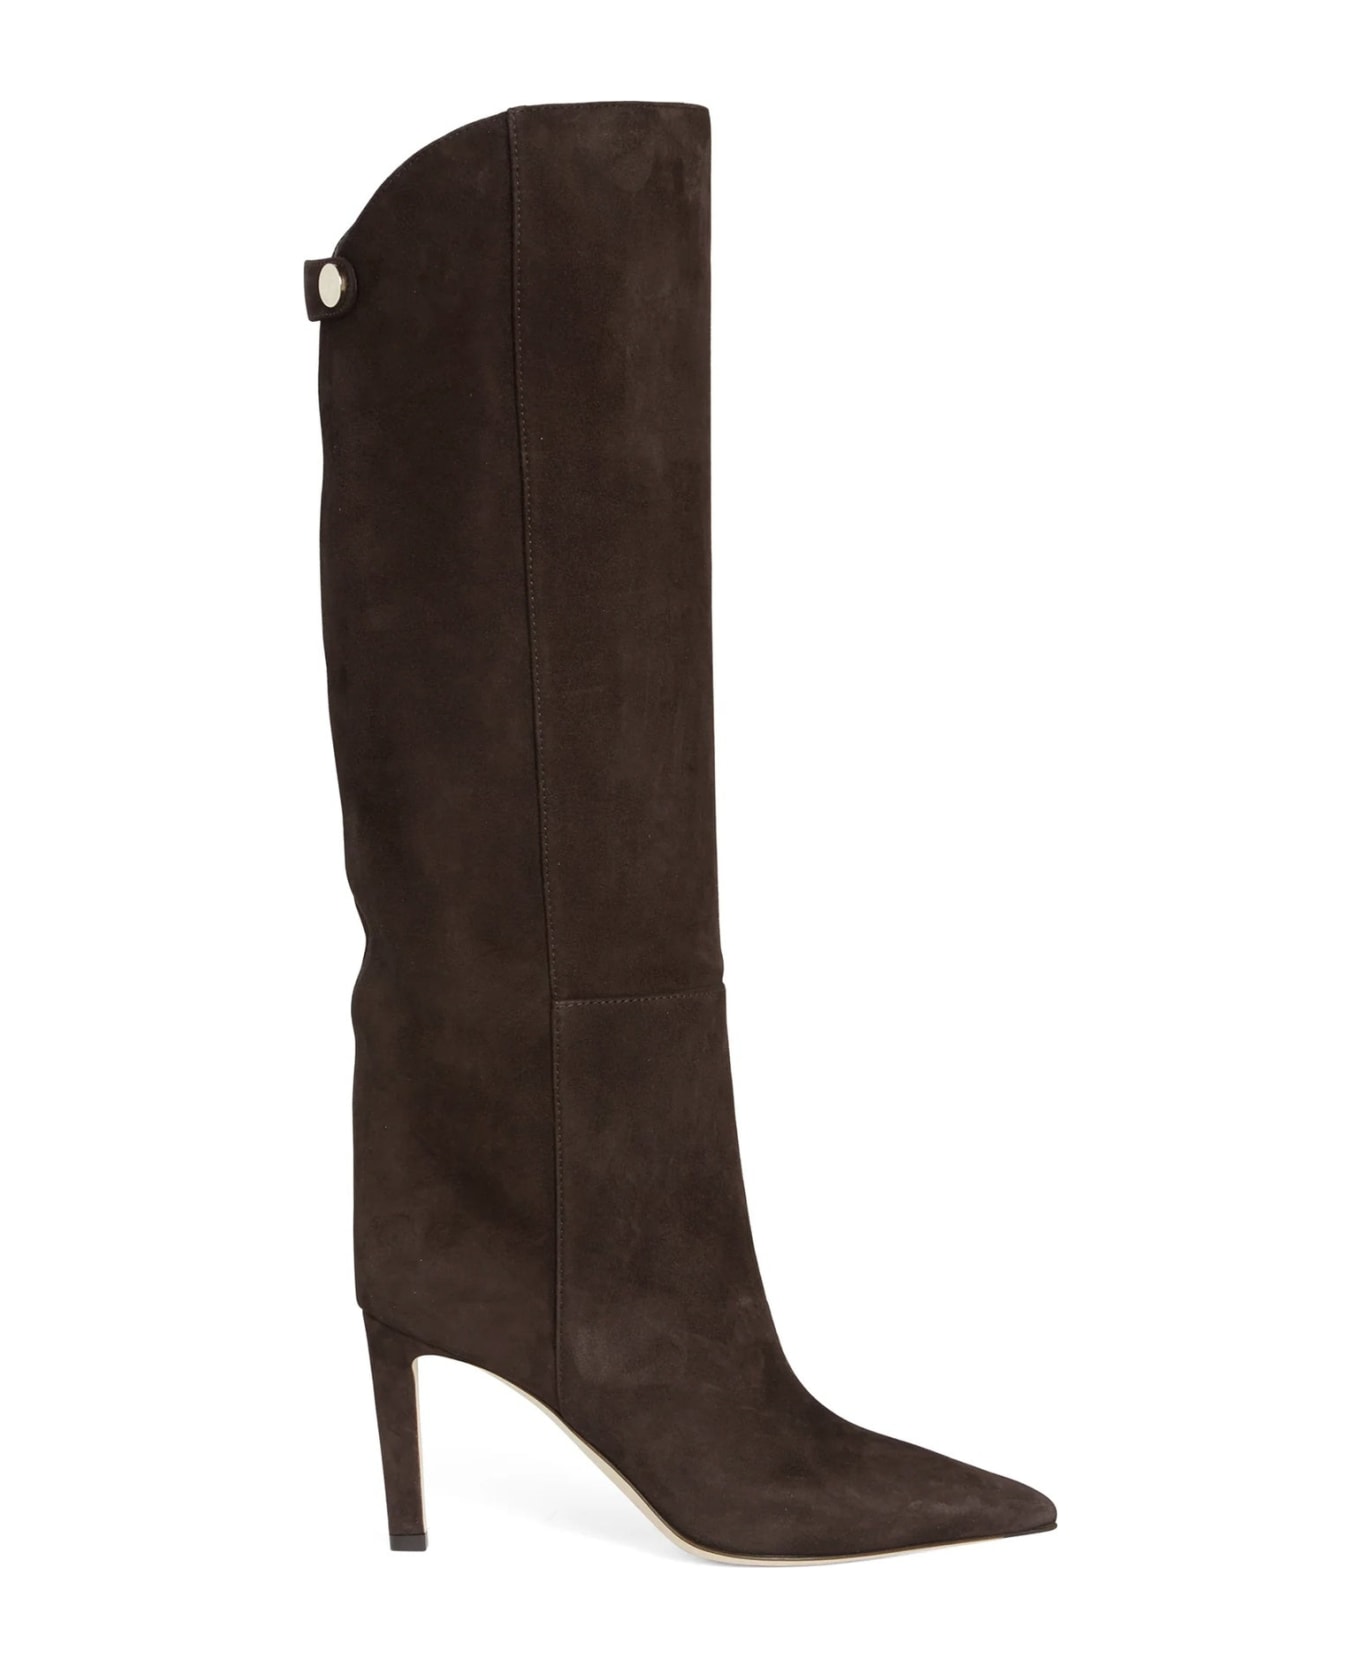 Jimmy Choo Alizze 85 Suede Boots - Brown